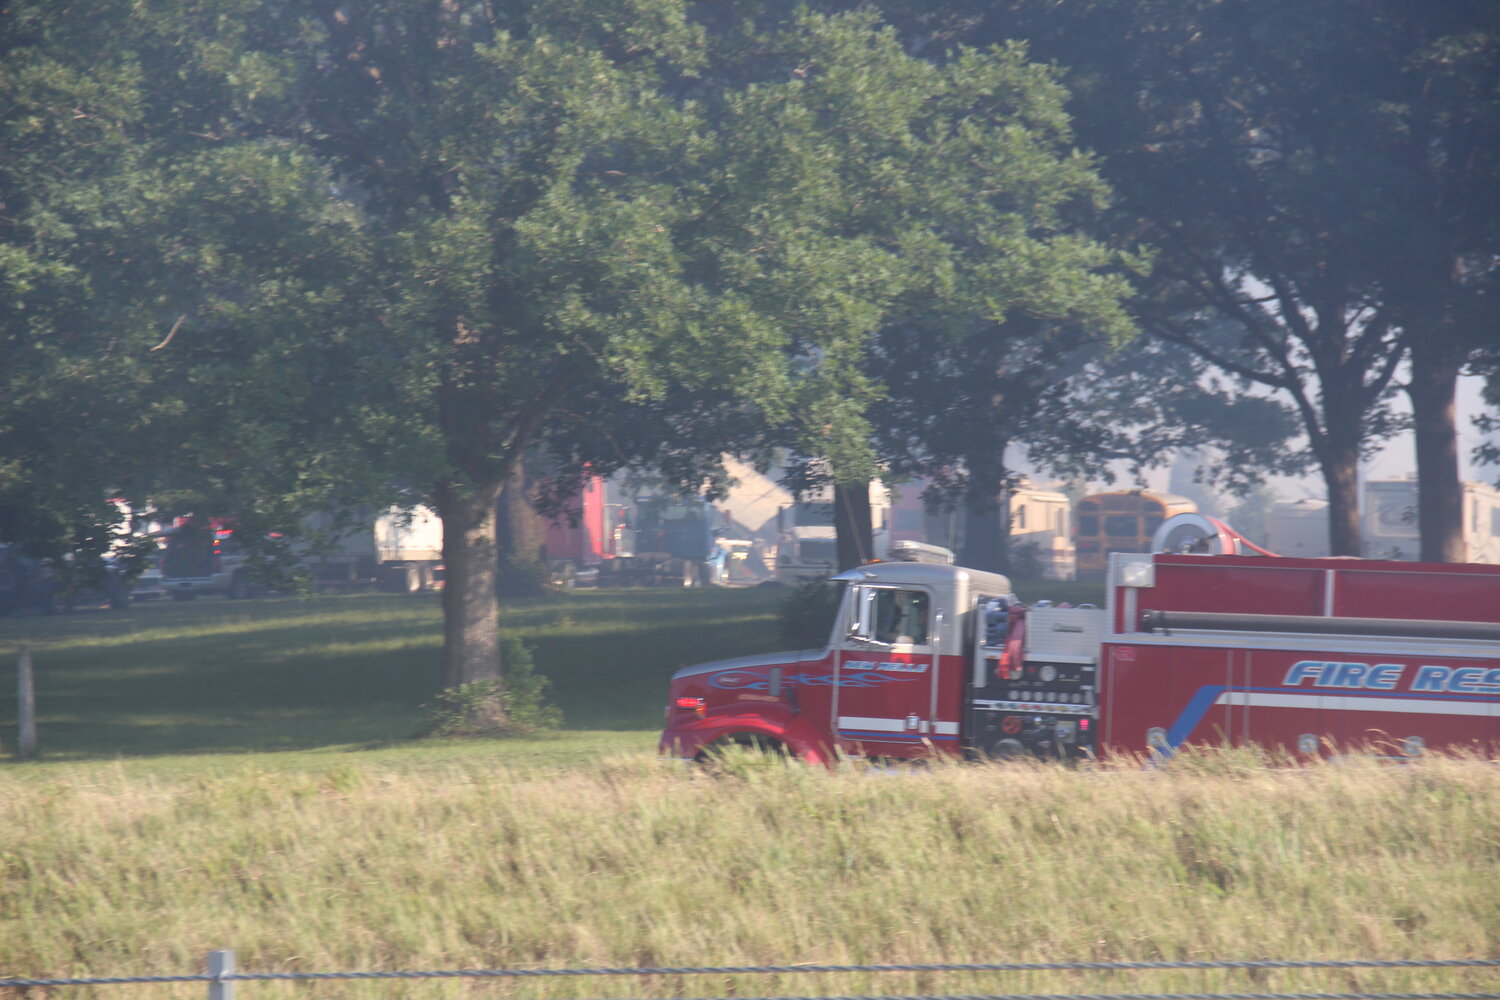 A fire truck was on scene at the site of a large fire in Warrenton early Monday morning. The fire blew smoke across the interstate and closed the North Service Road.